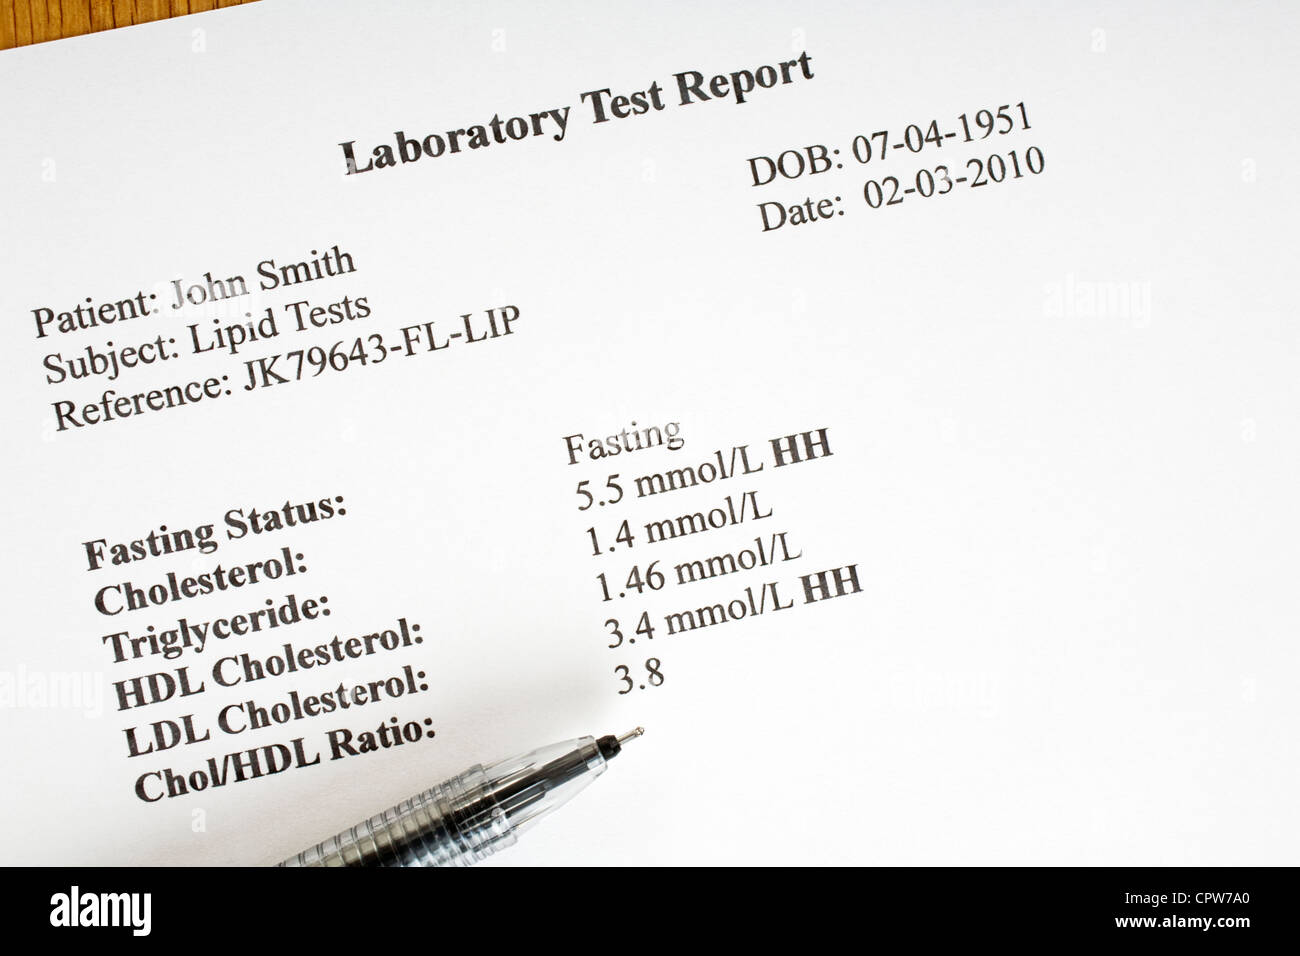 Laboratory report of cholesterol test.Names and reference numbers are fictitious. Stock Photo